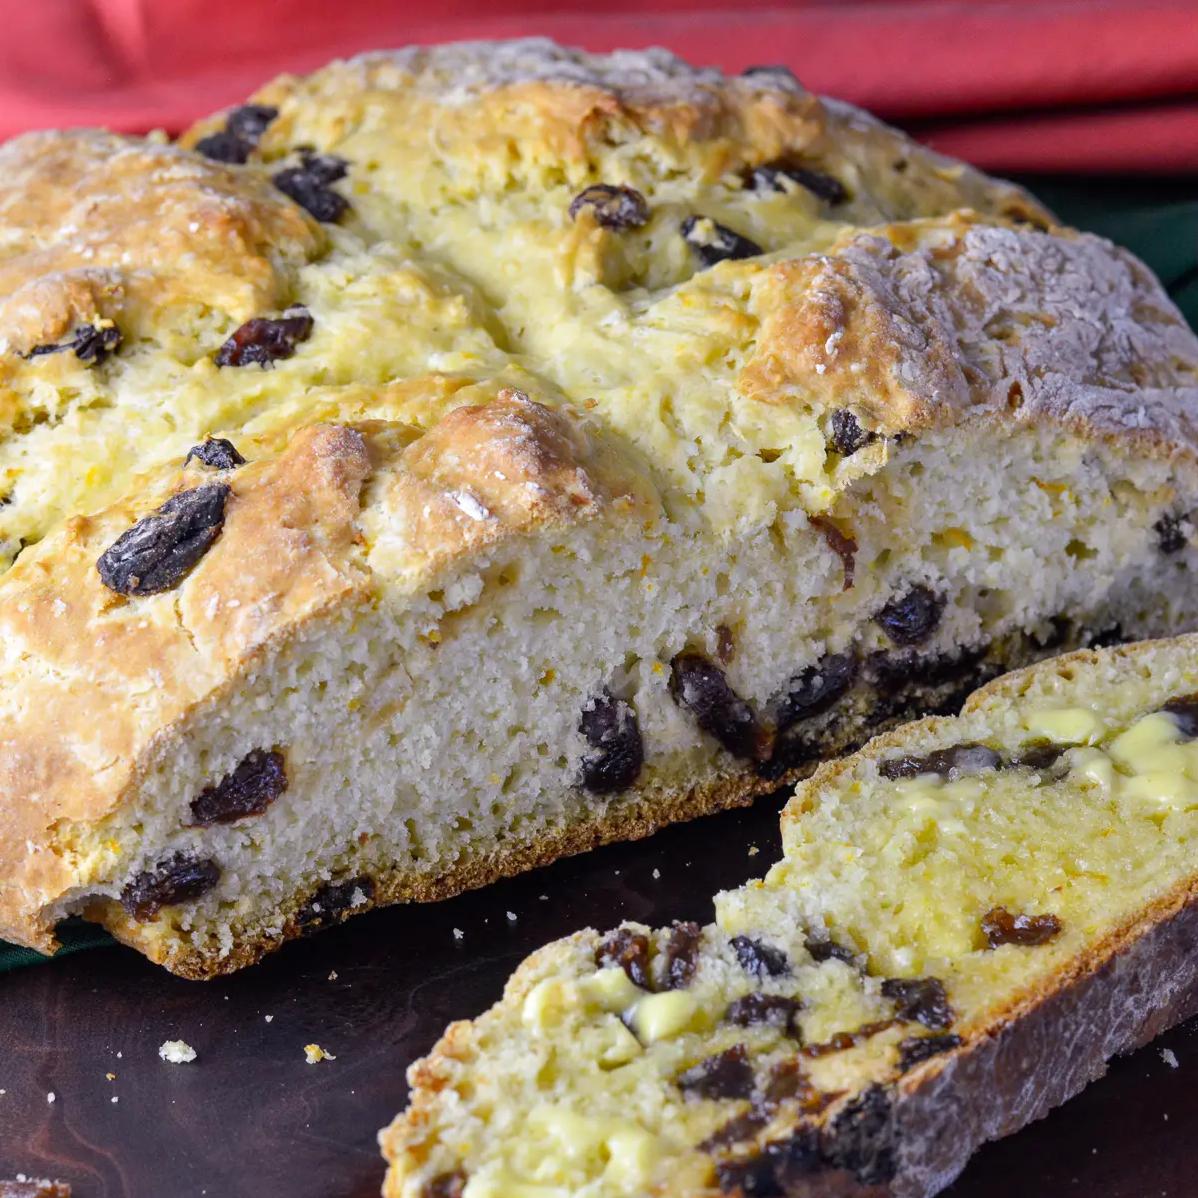  This Irish soda bread with Raisinets recipe is sure to become a family favorite